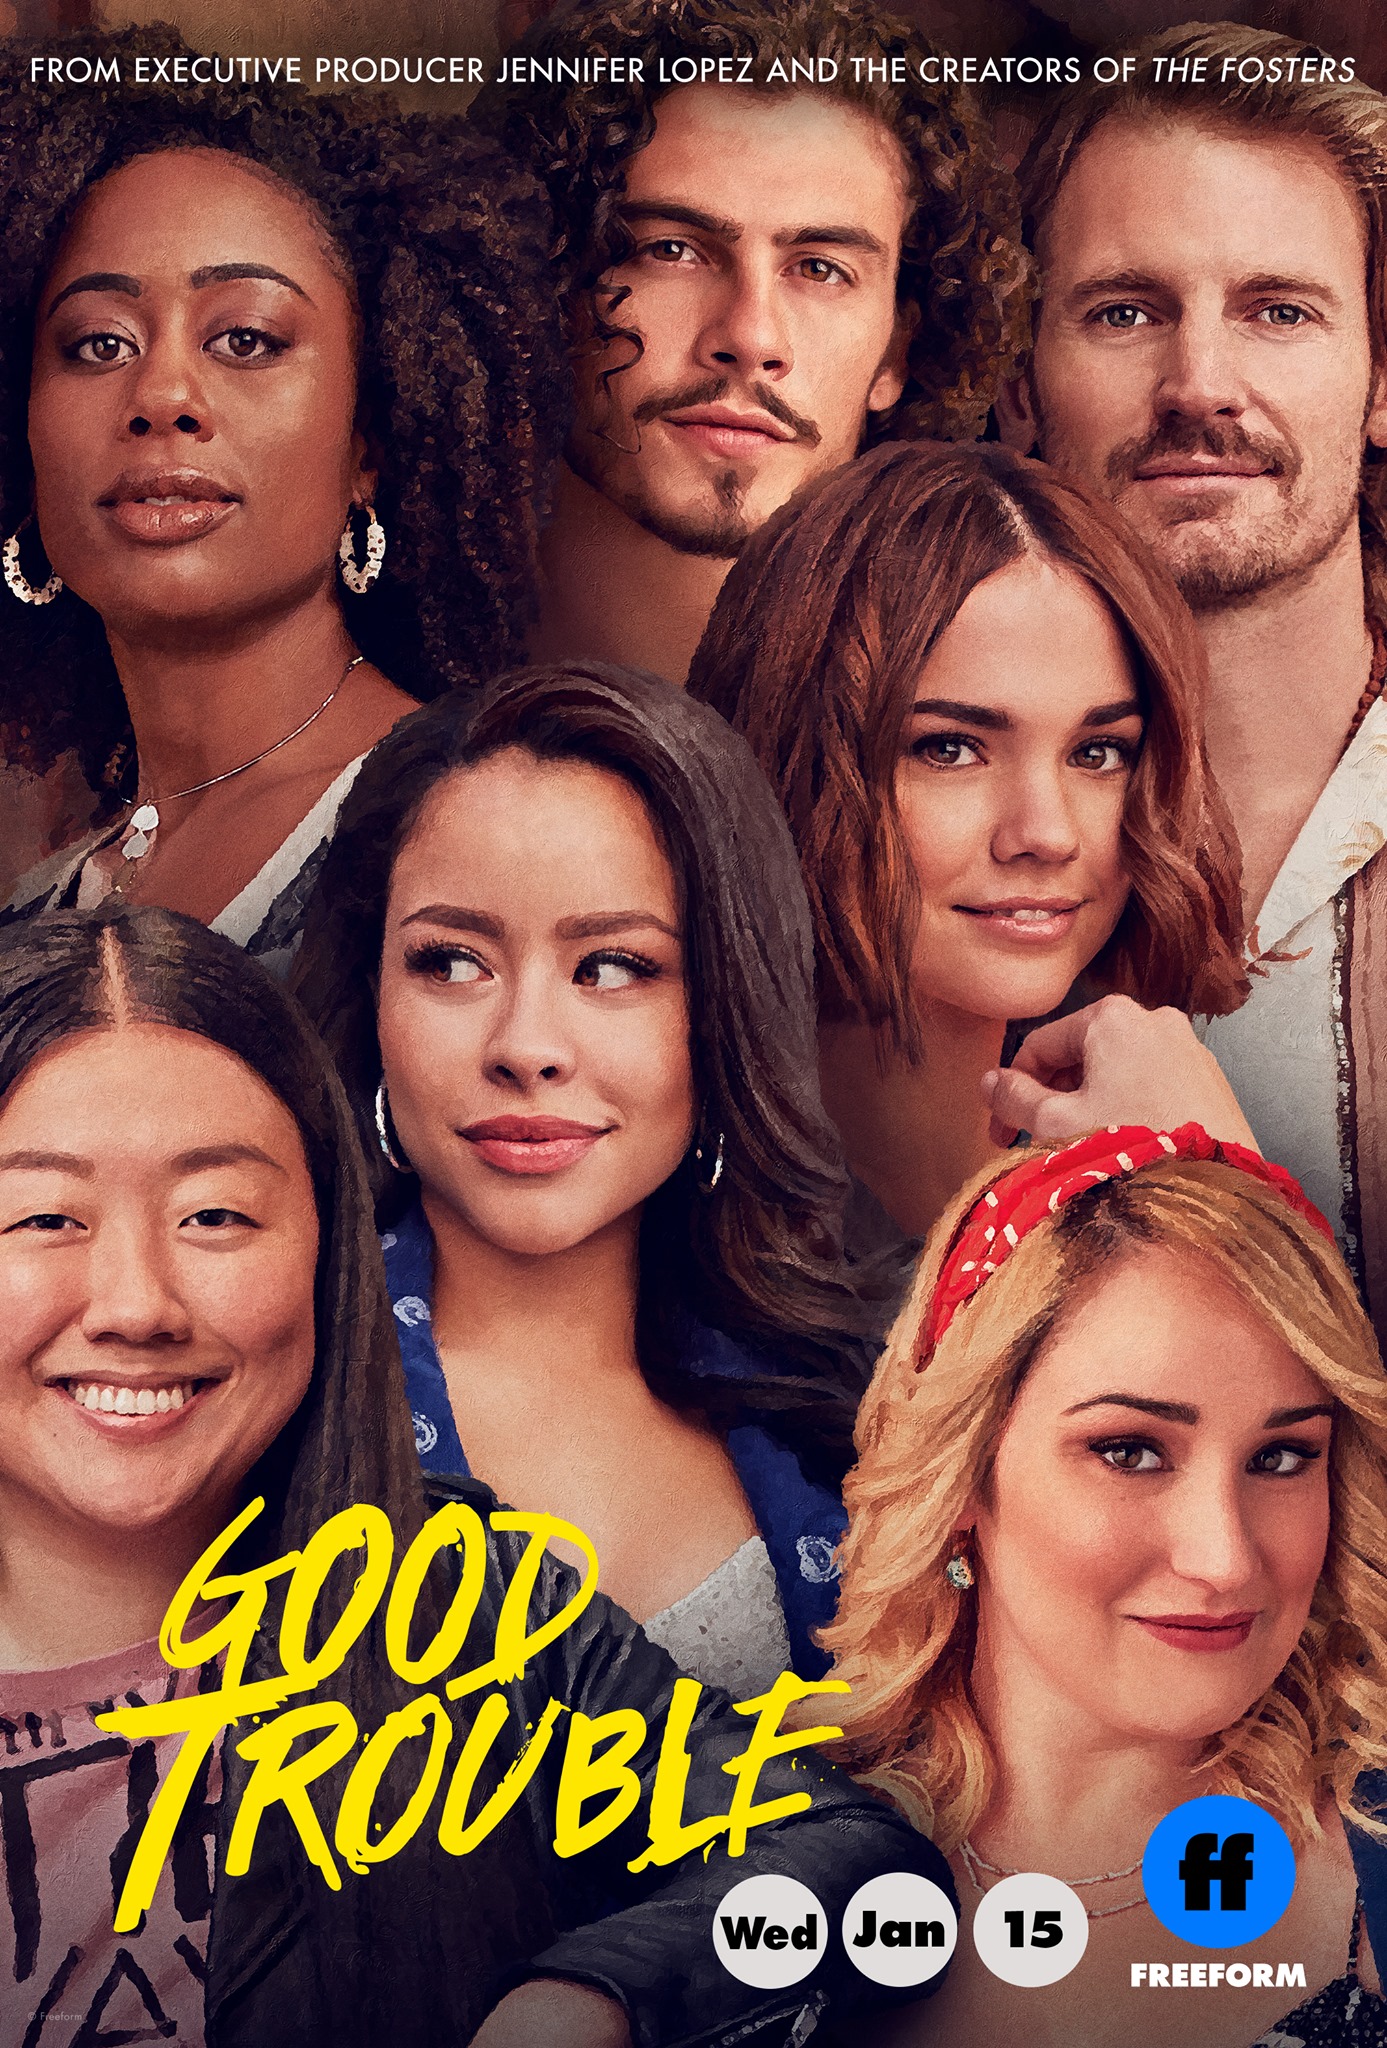 Release information for Season 5 of Good Trouble, including the cast